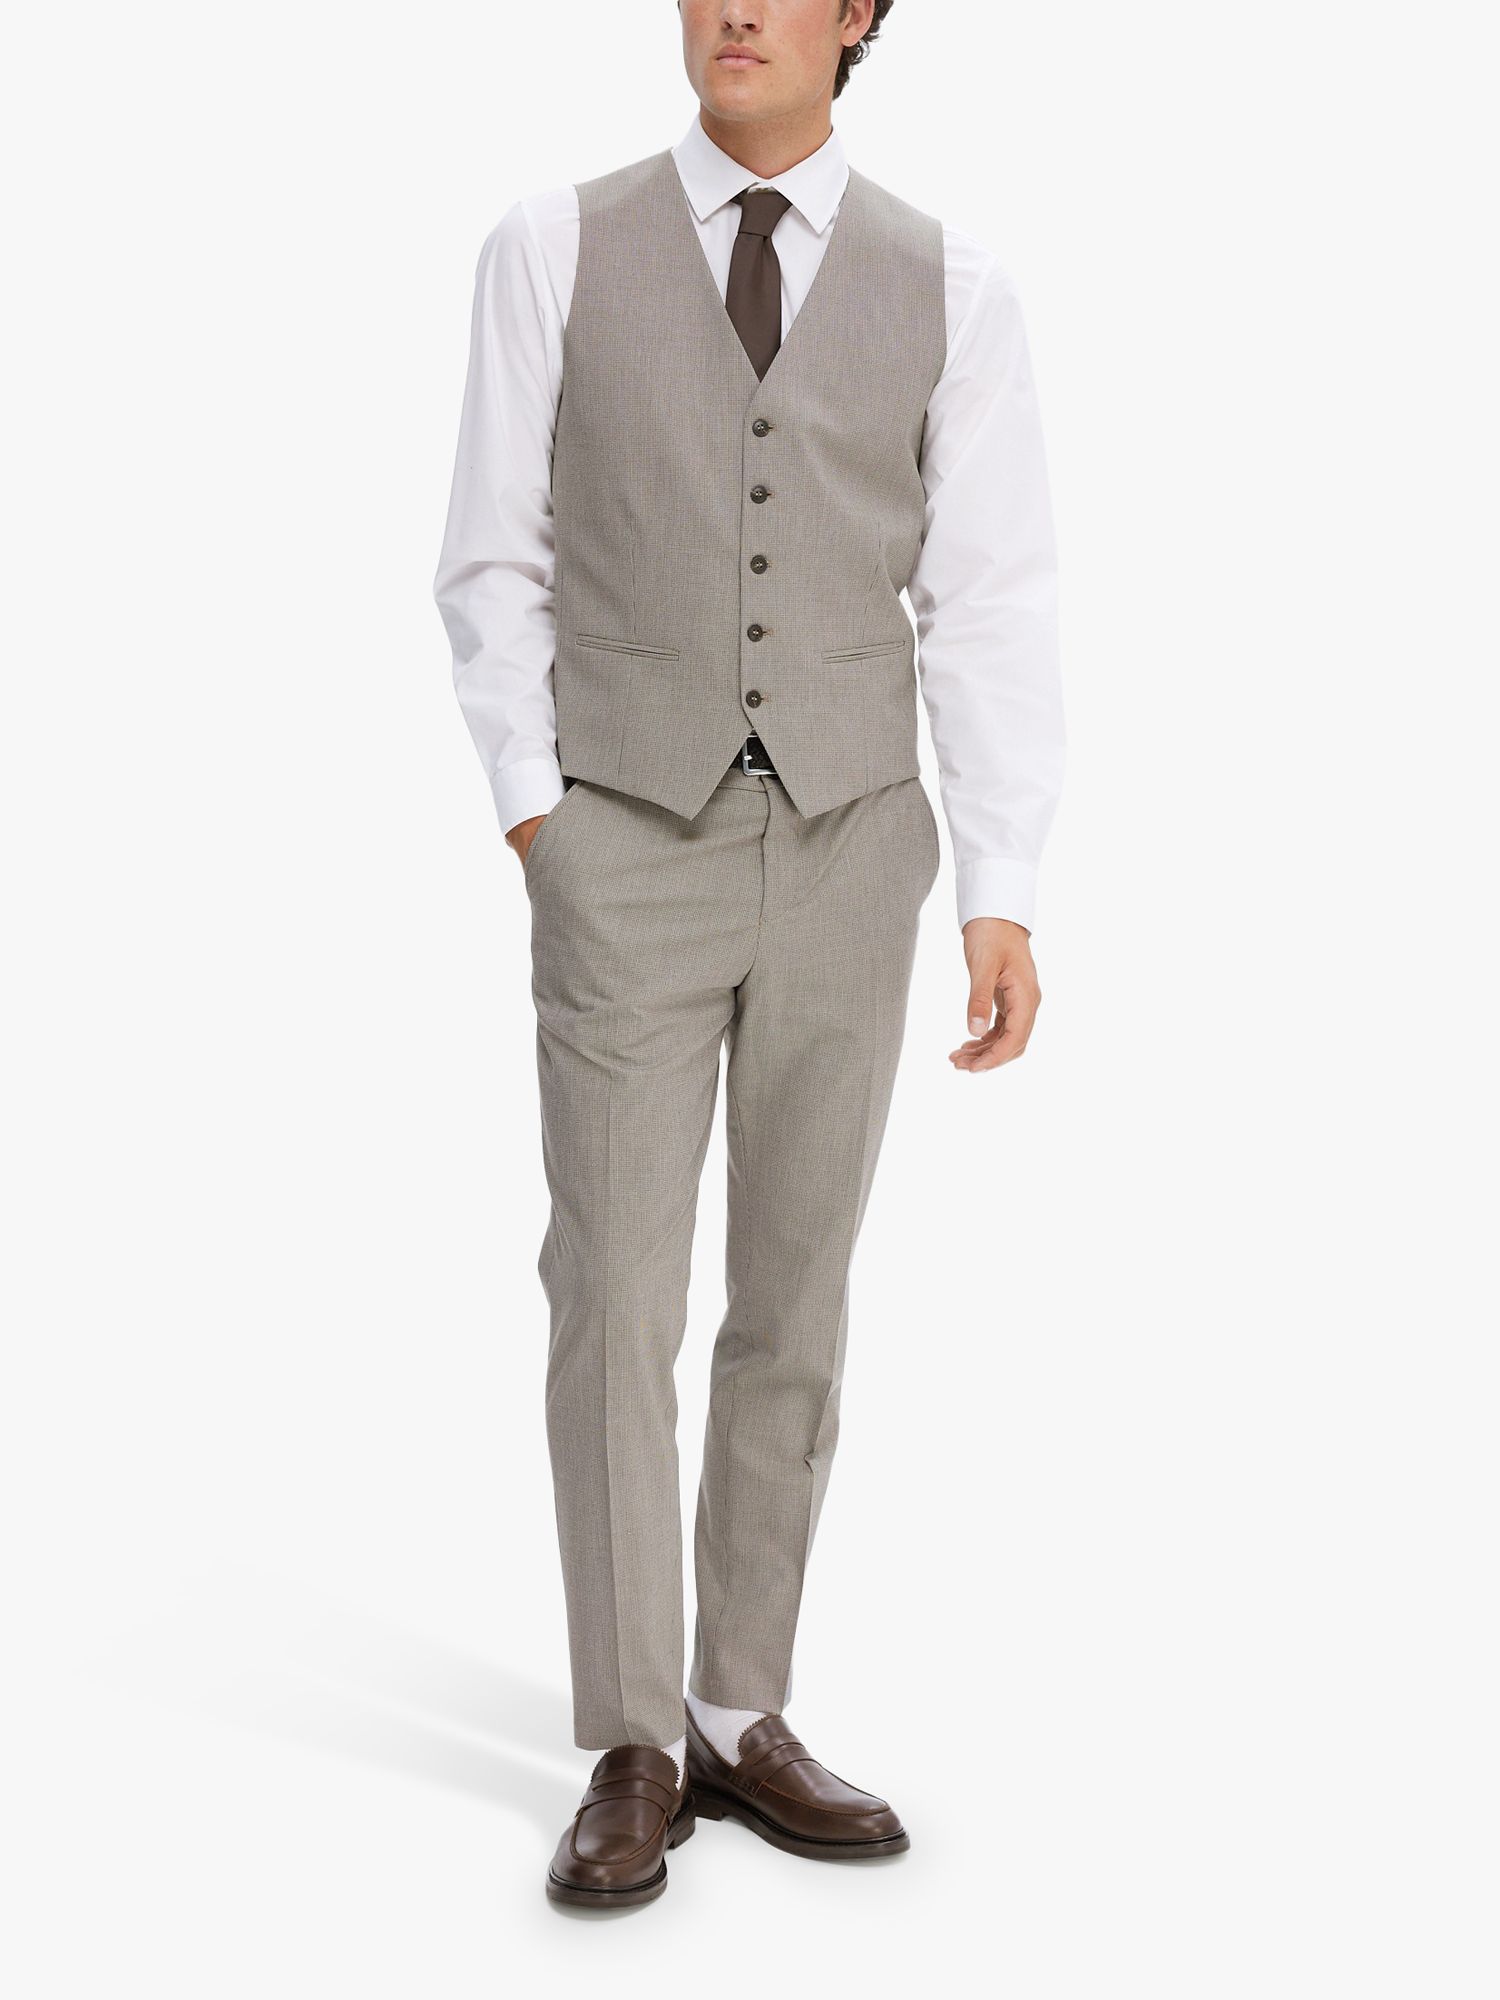 SELECTED HOMME Tailored Fit Waistcoat, Light Brown, 42R